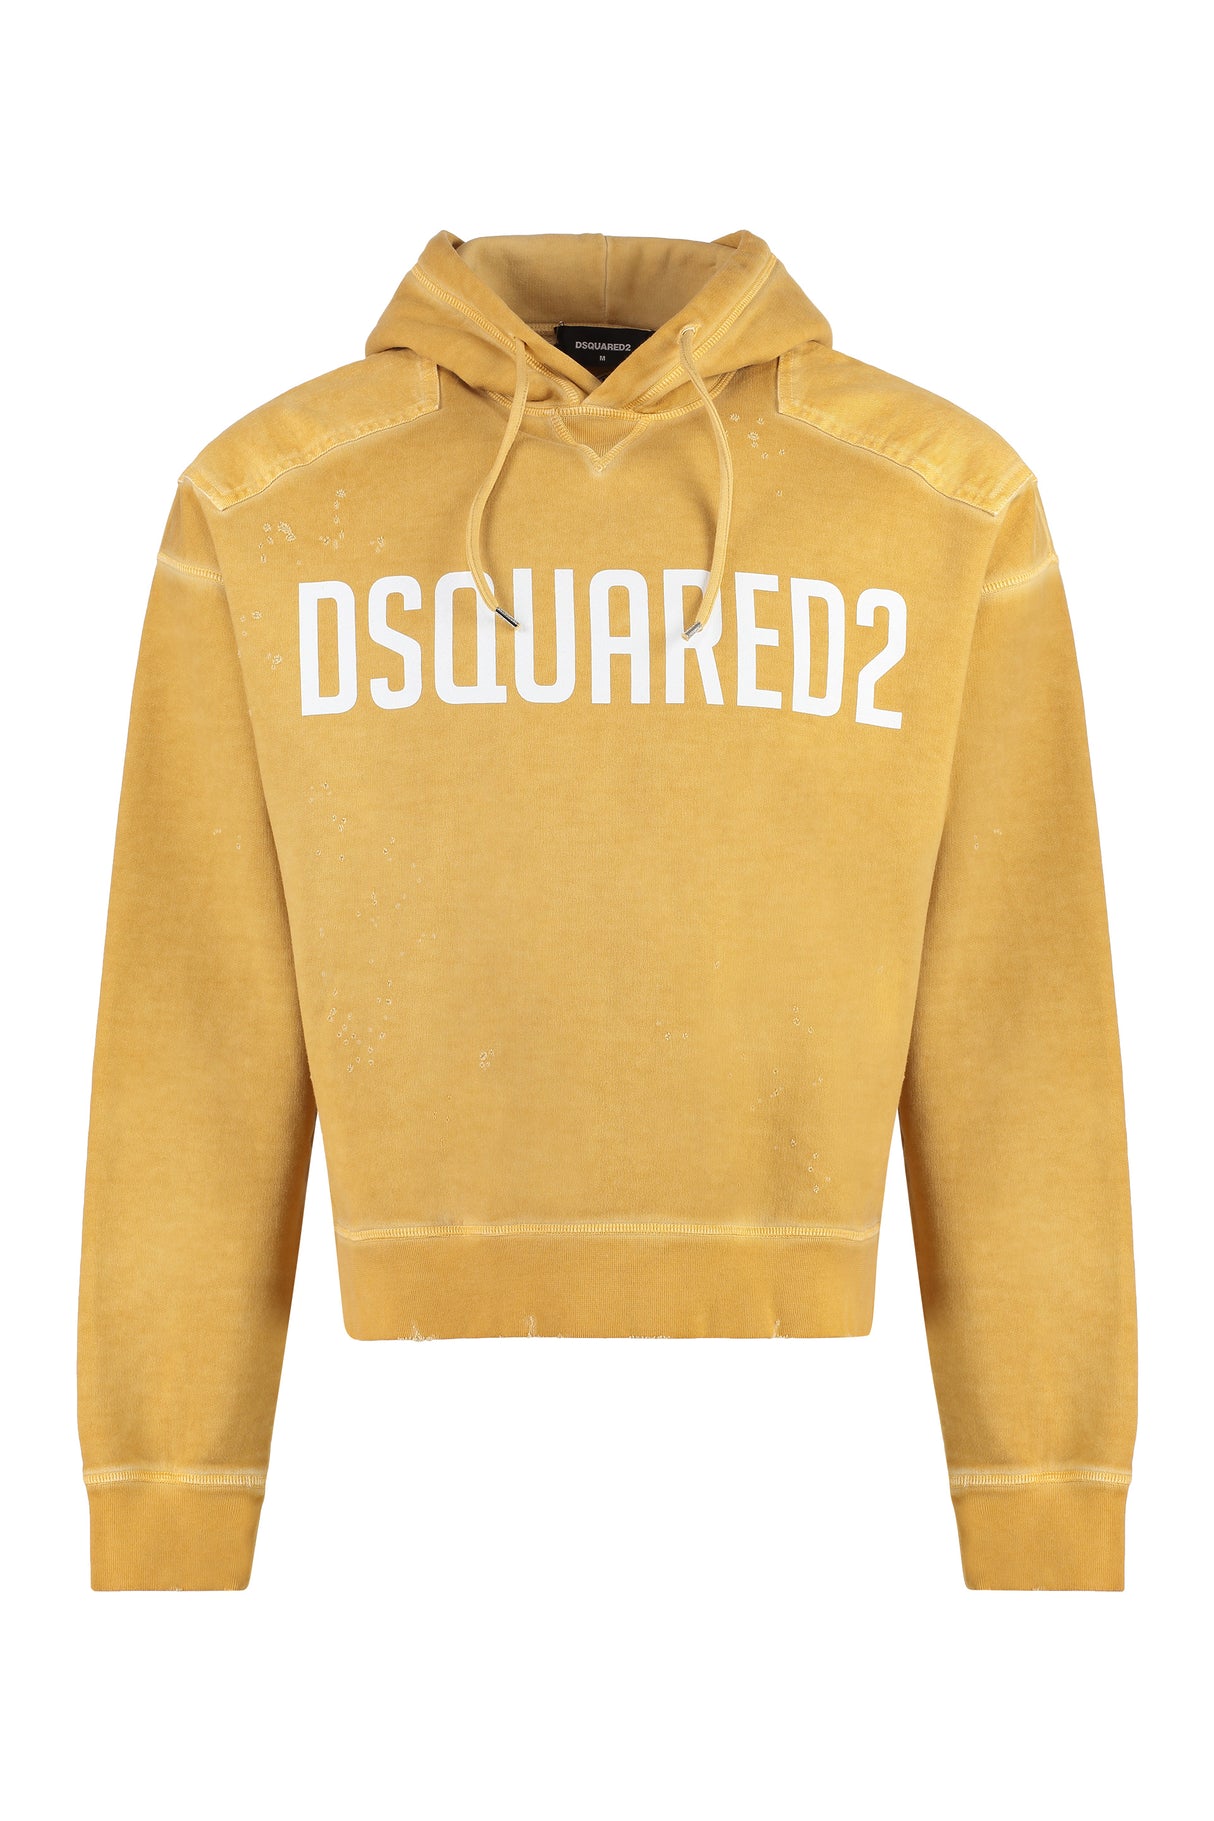 DSQUARED2 Men's Yellow Hoodie - Destroyed Effect + Ribbed Cuffs & Lower Edge